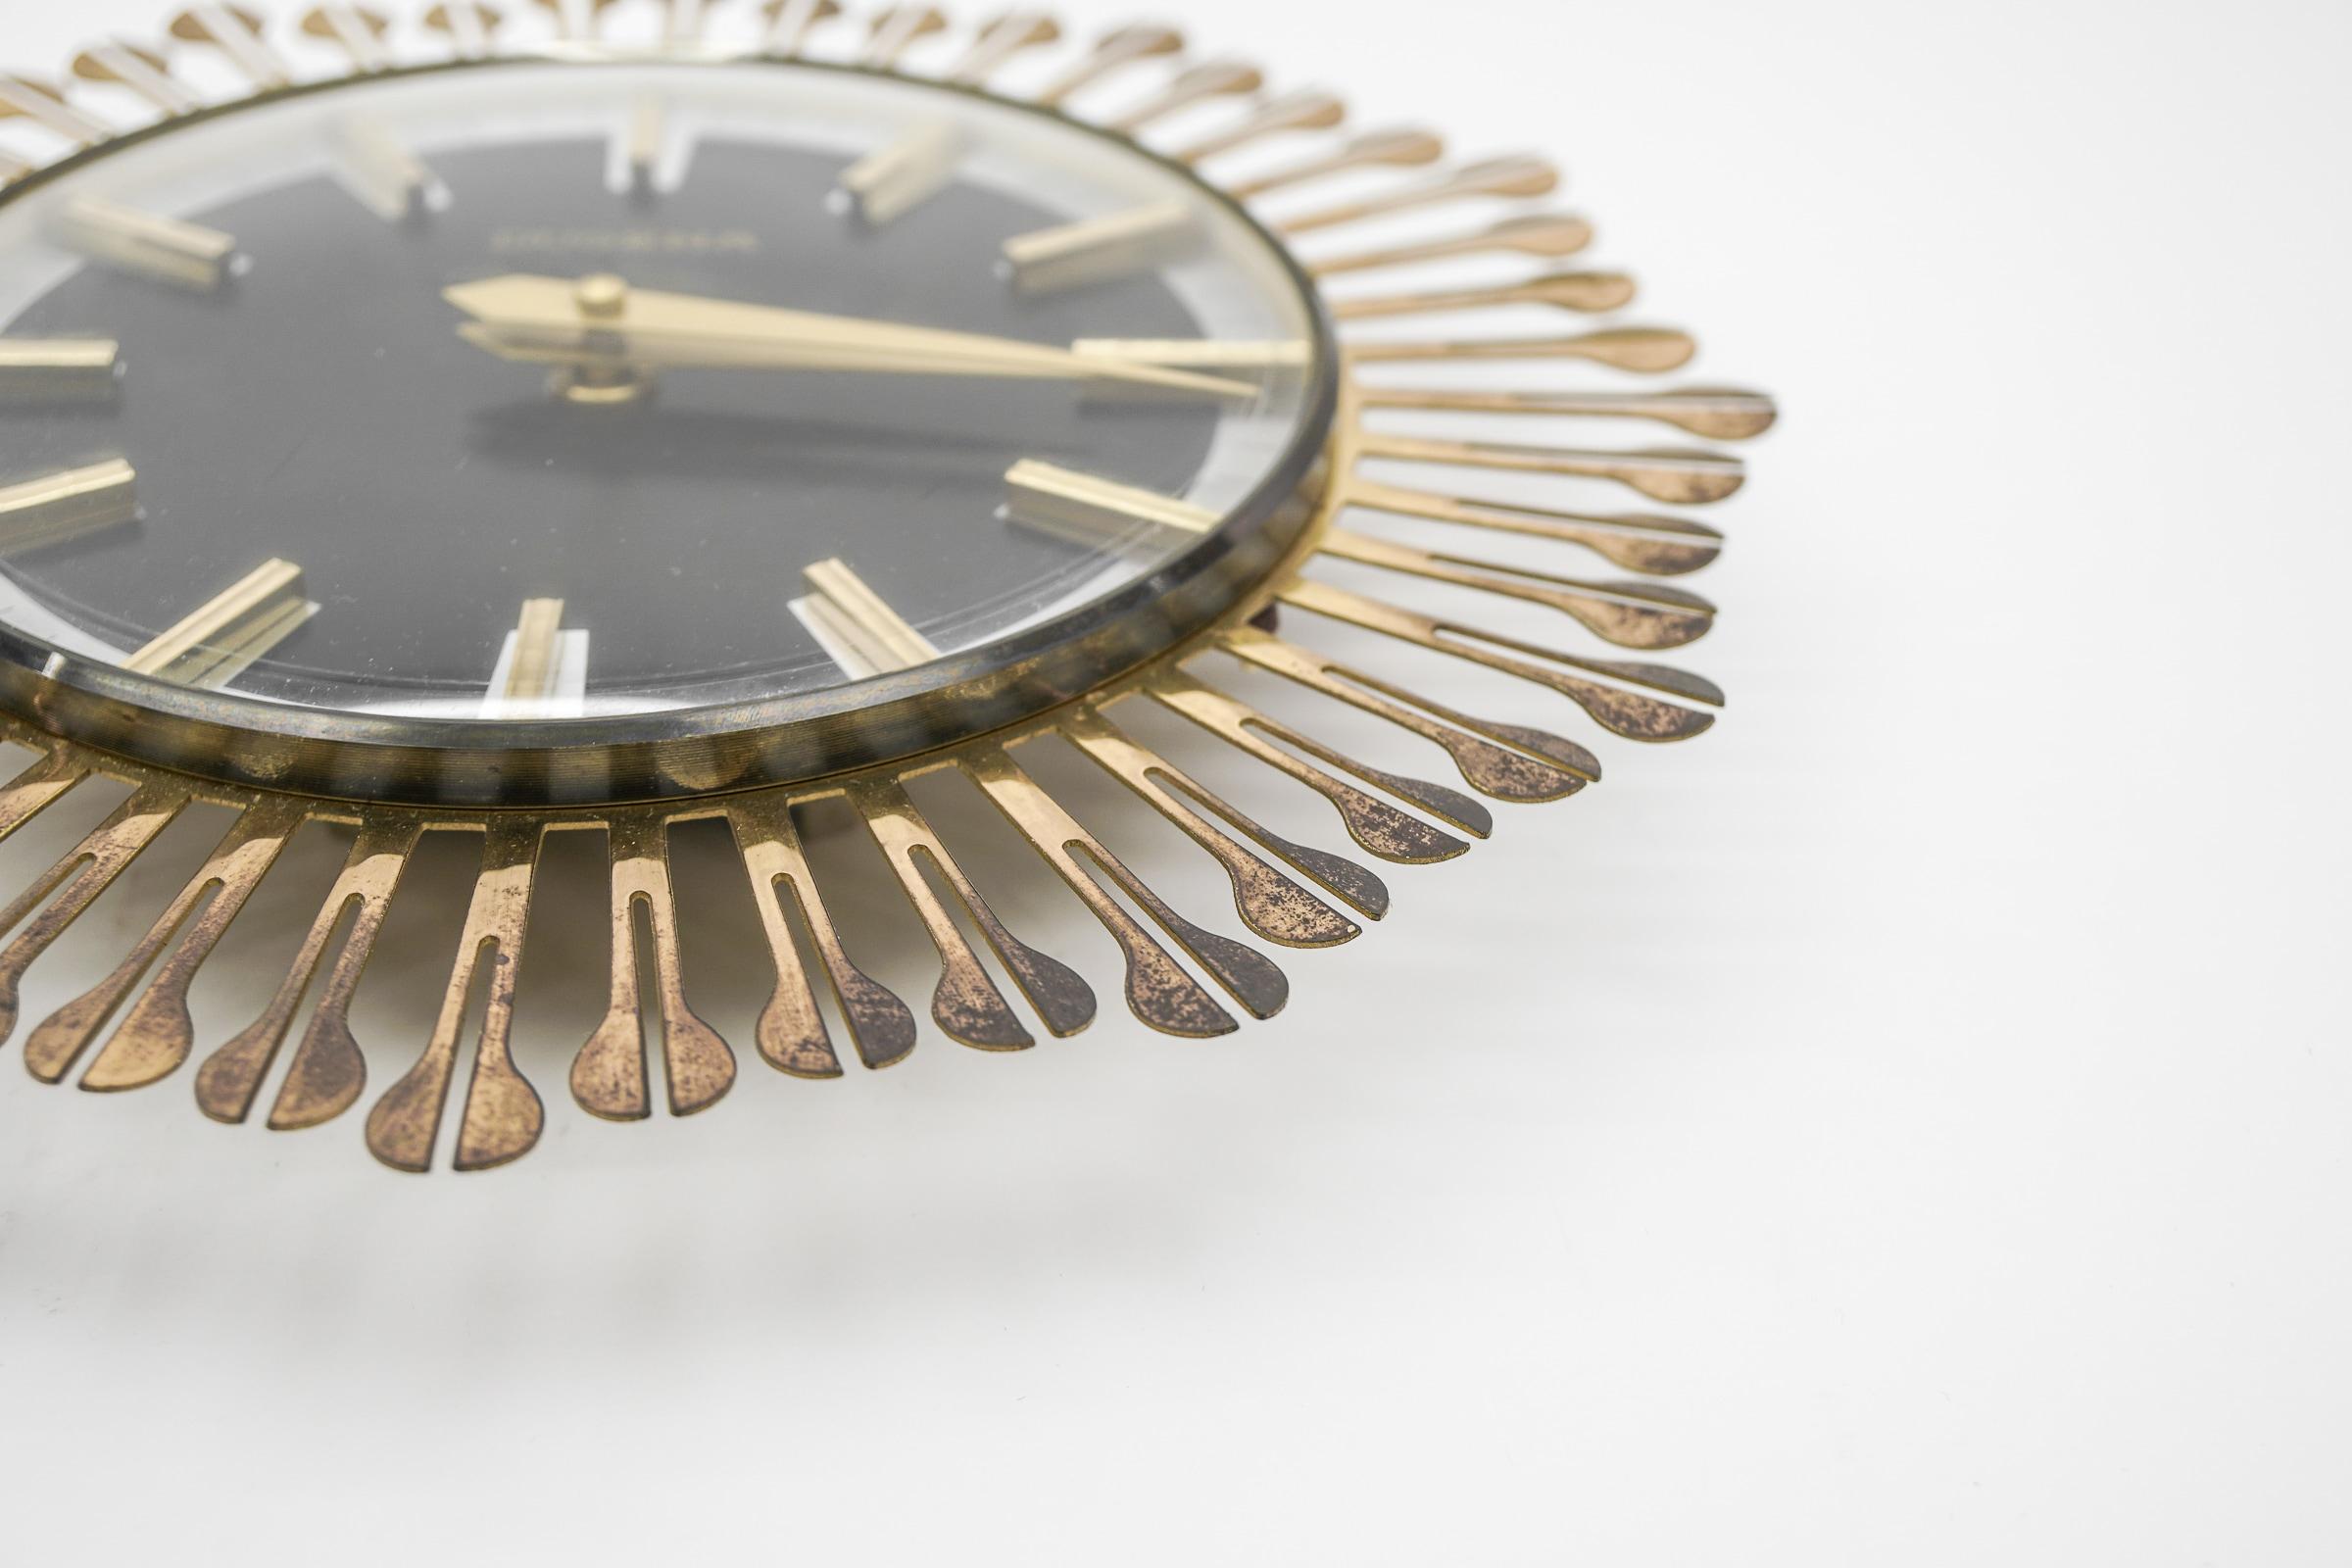 Mid-20th Century Mid-Century Modern Sunburst Wall Clock by Dugena in Brass, 1960s, Germany For Sale